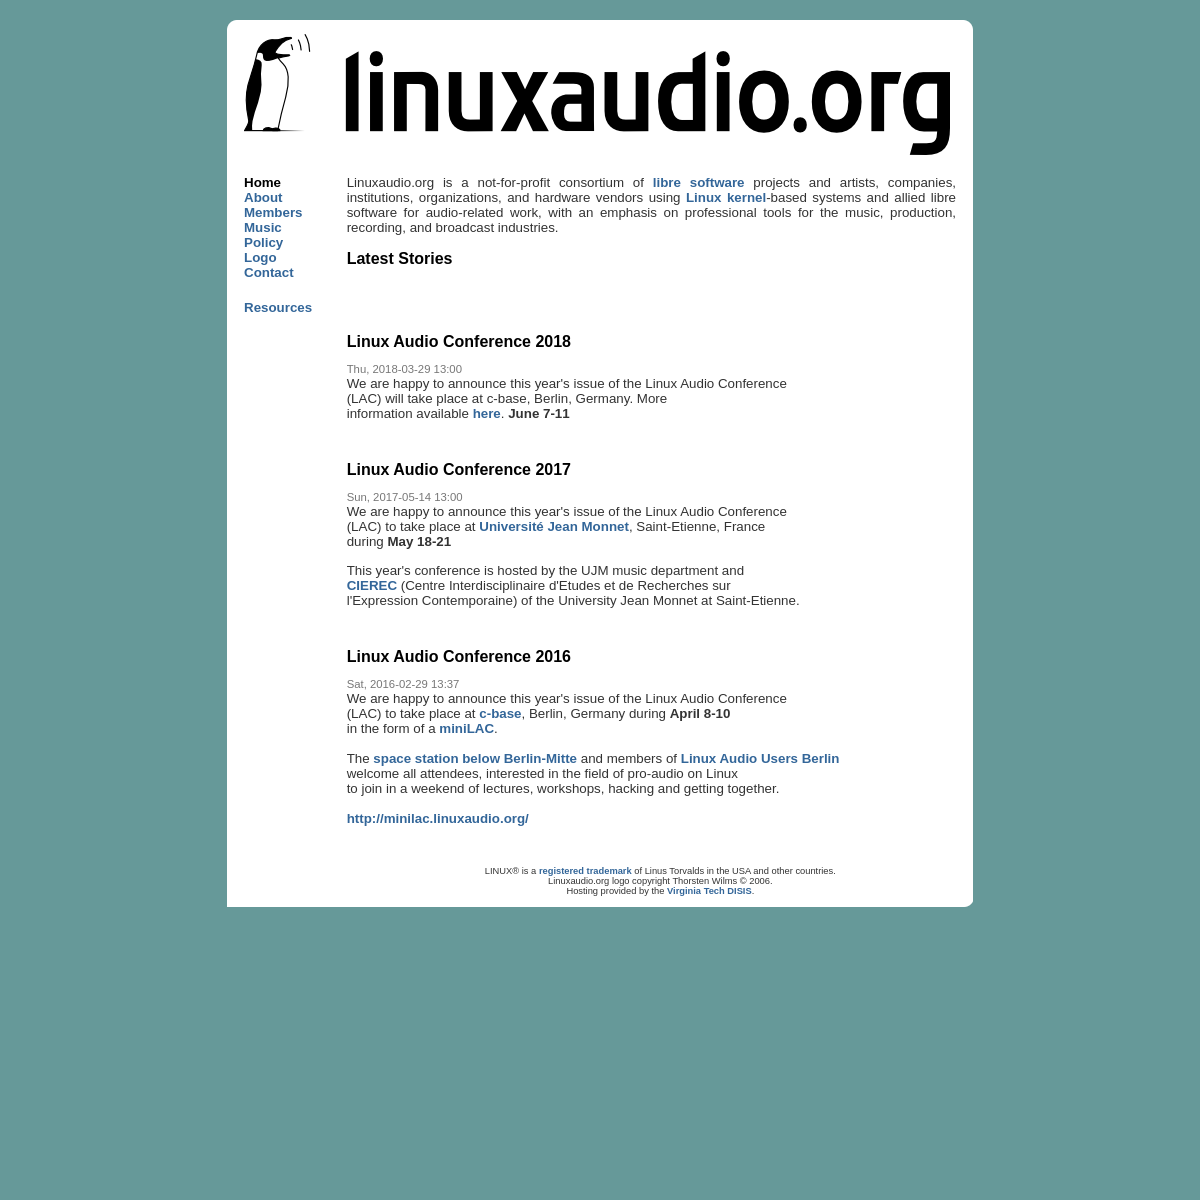 A complete backup of linuxaudio.org